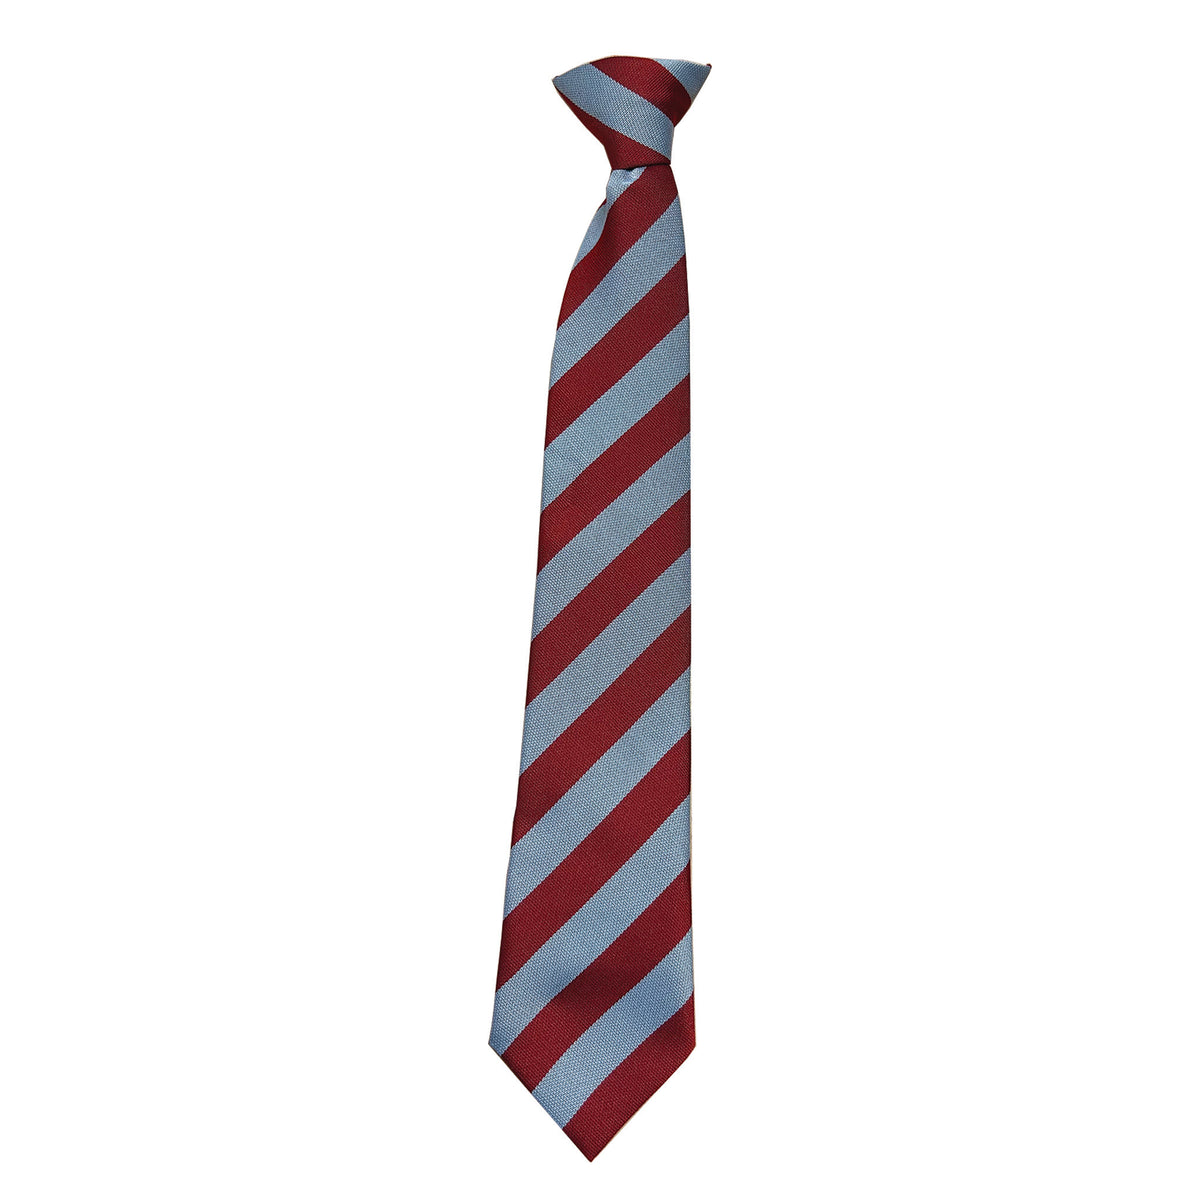 Bourne End Academy Tie Red